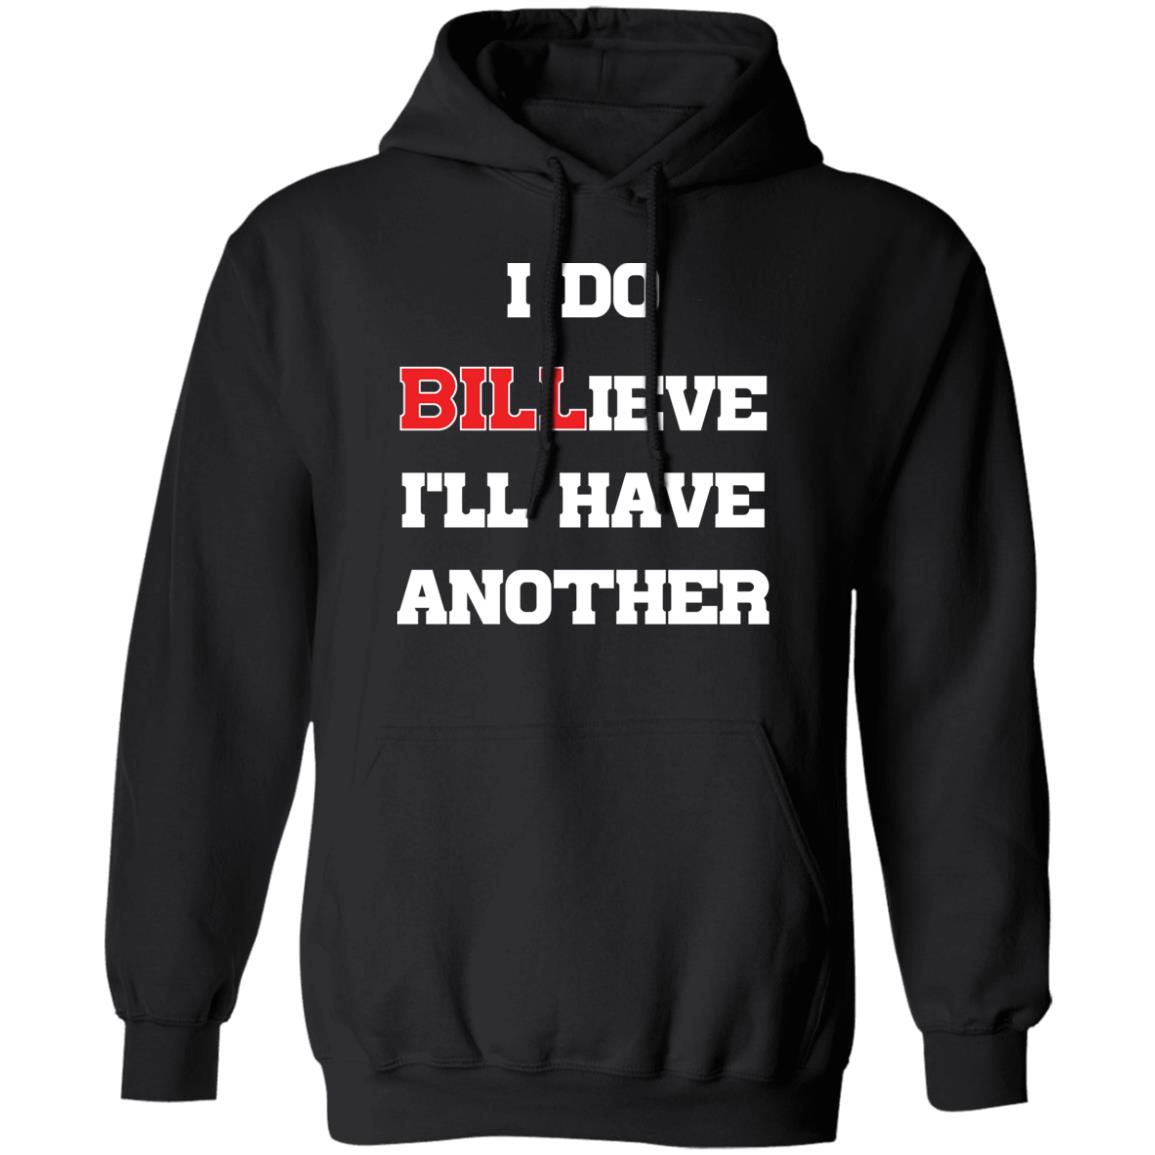 I Do Billieve I’ll Have Another Shirt 2